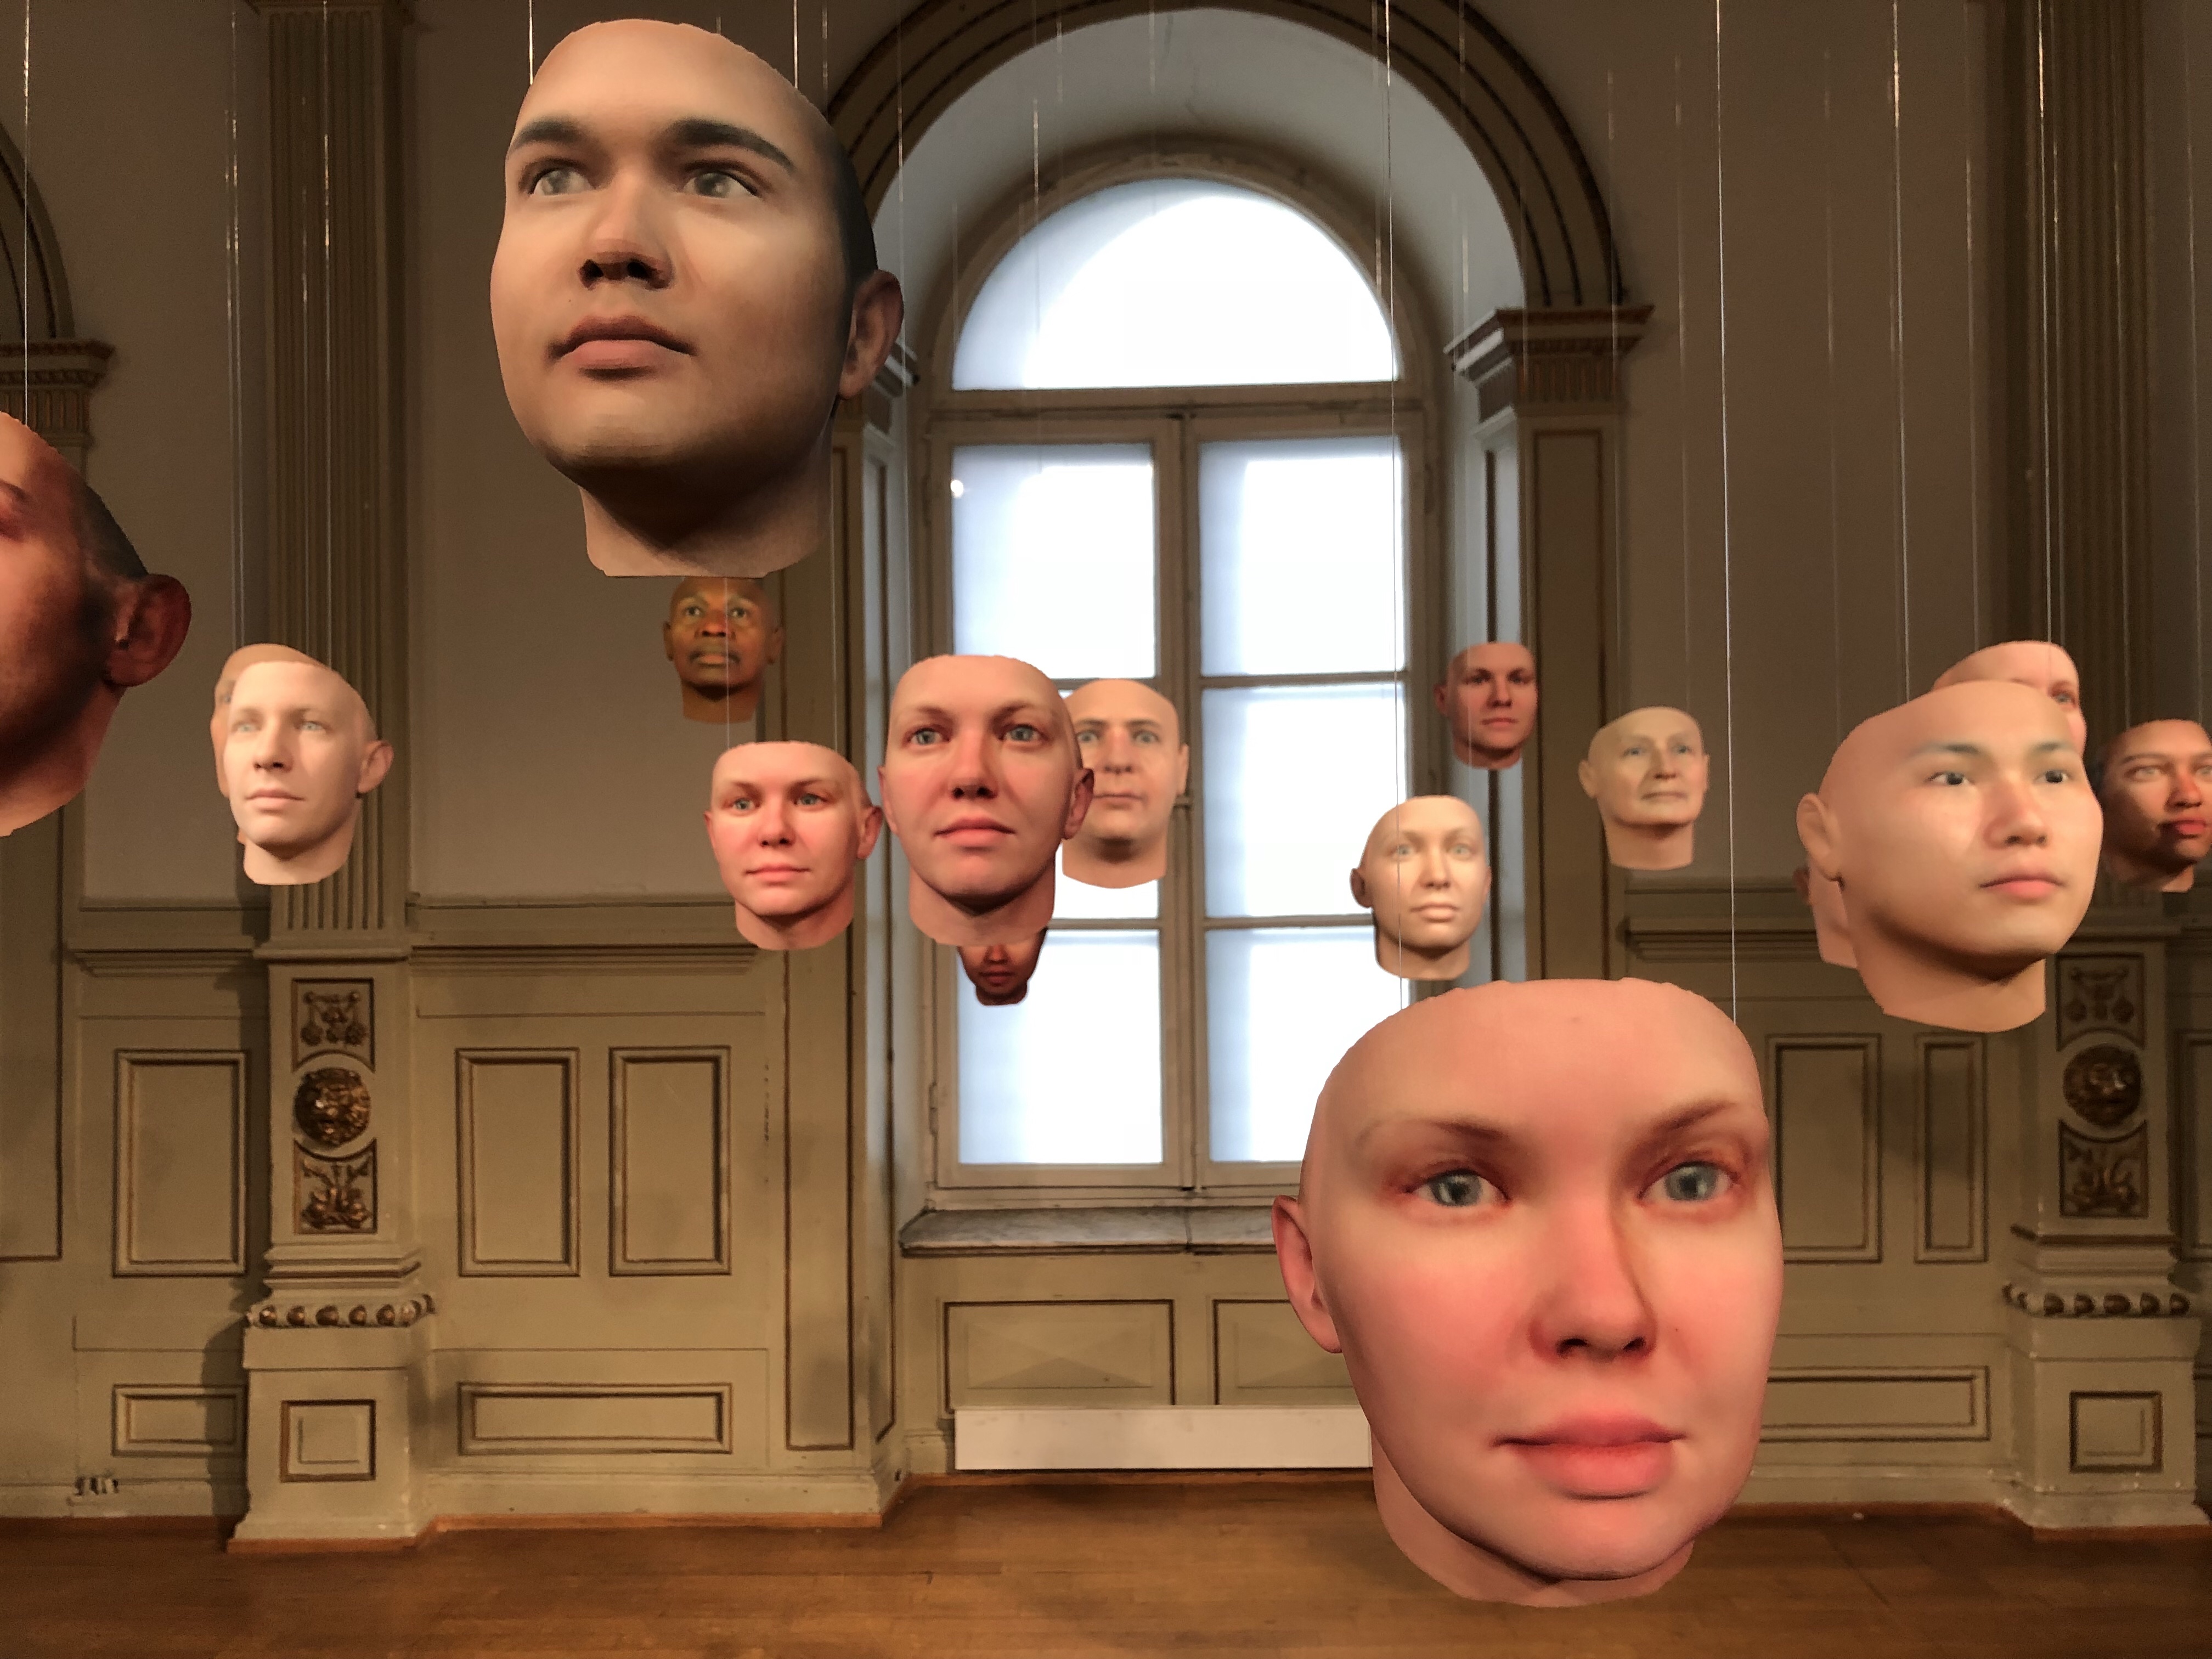 Many masks resembling human faces hang from the ceiling in an art gallery.